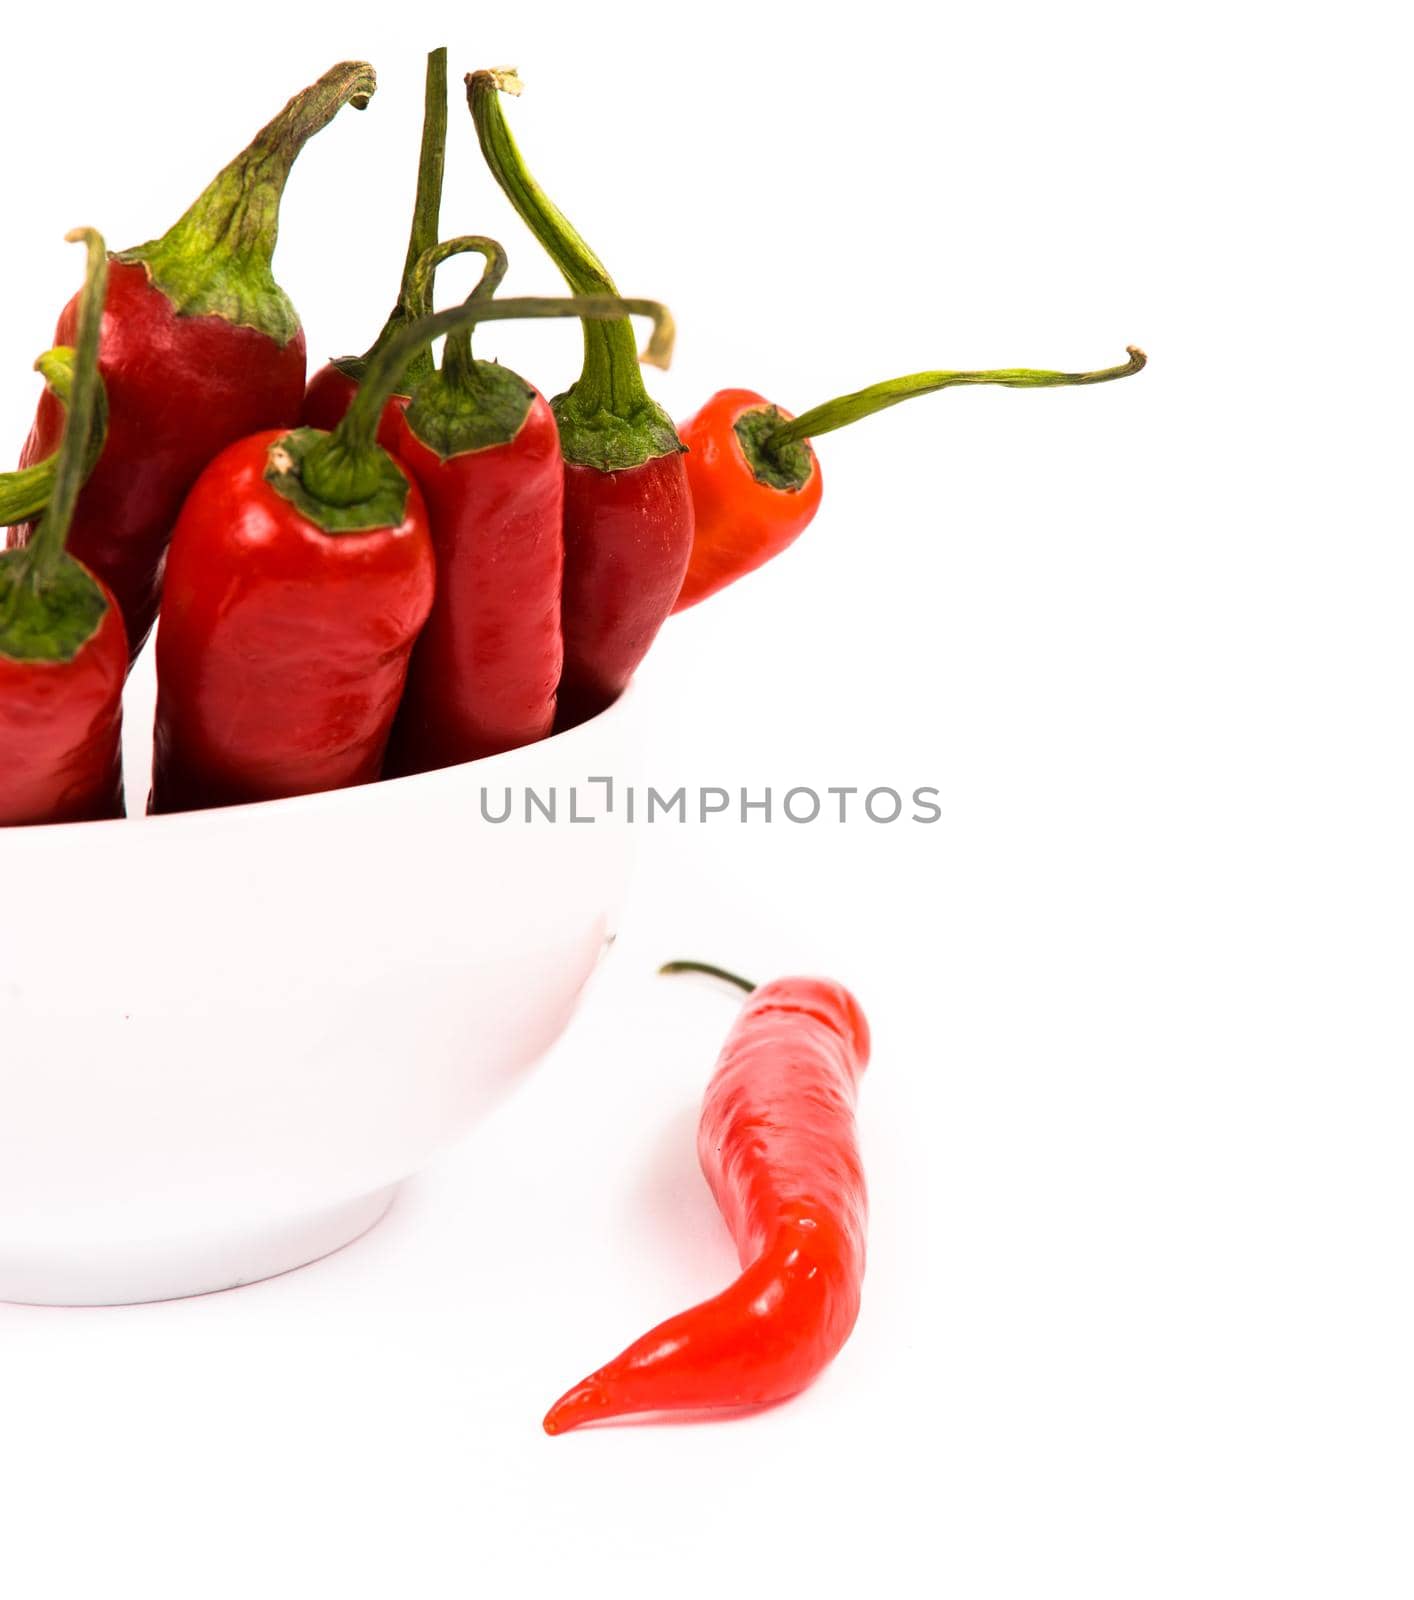 Red chili peppers by tan4ikk1